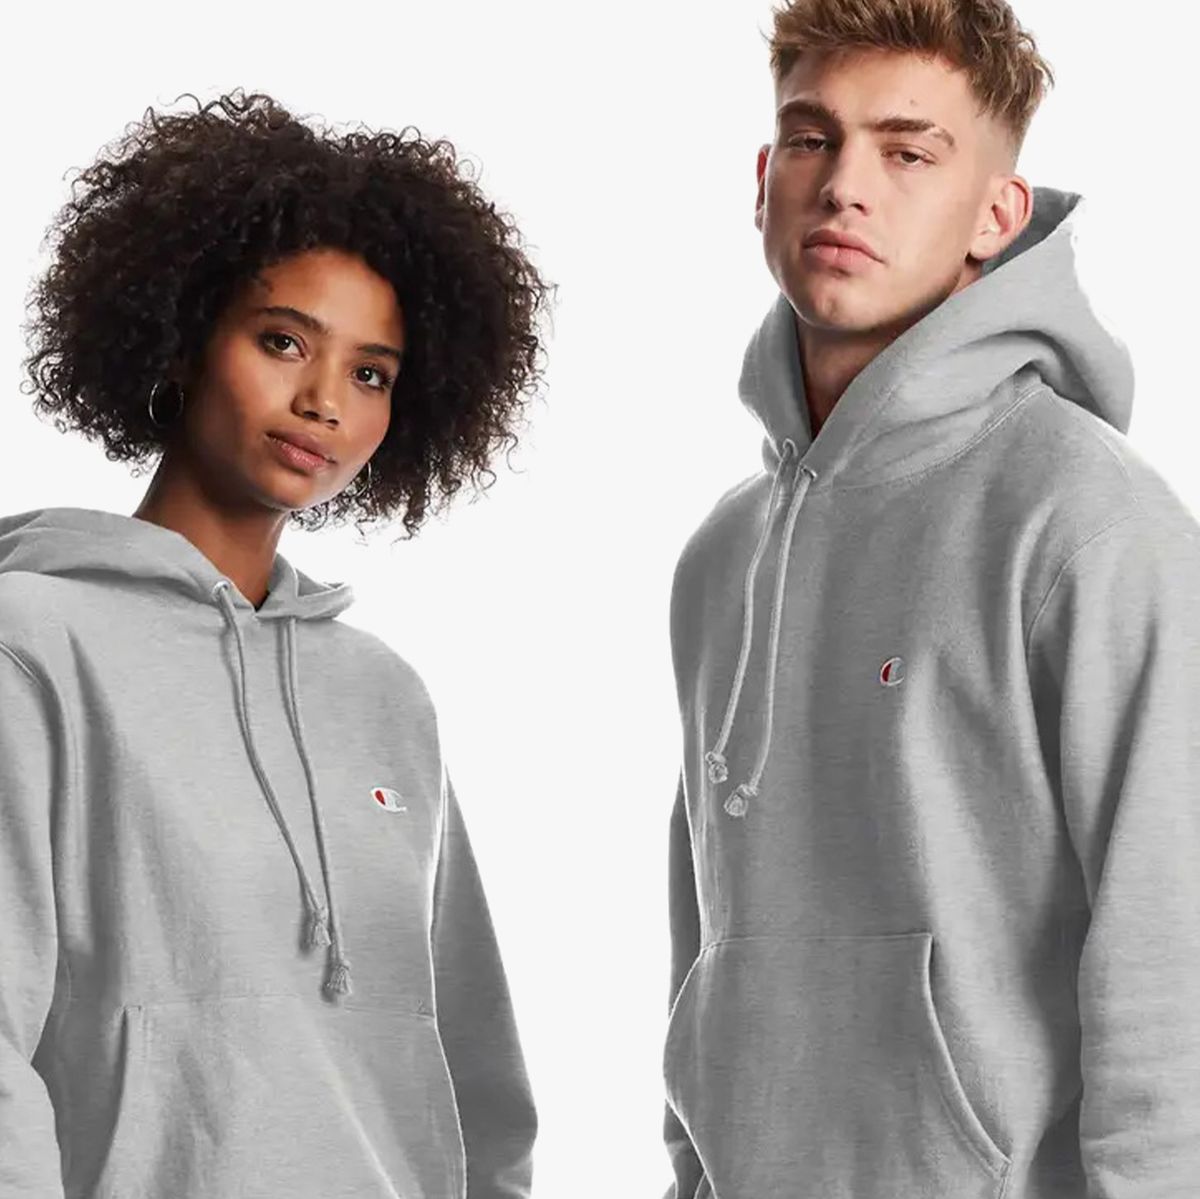 pille Topmøde Seaside Everything You Should Know About Champion Sweatshirts